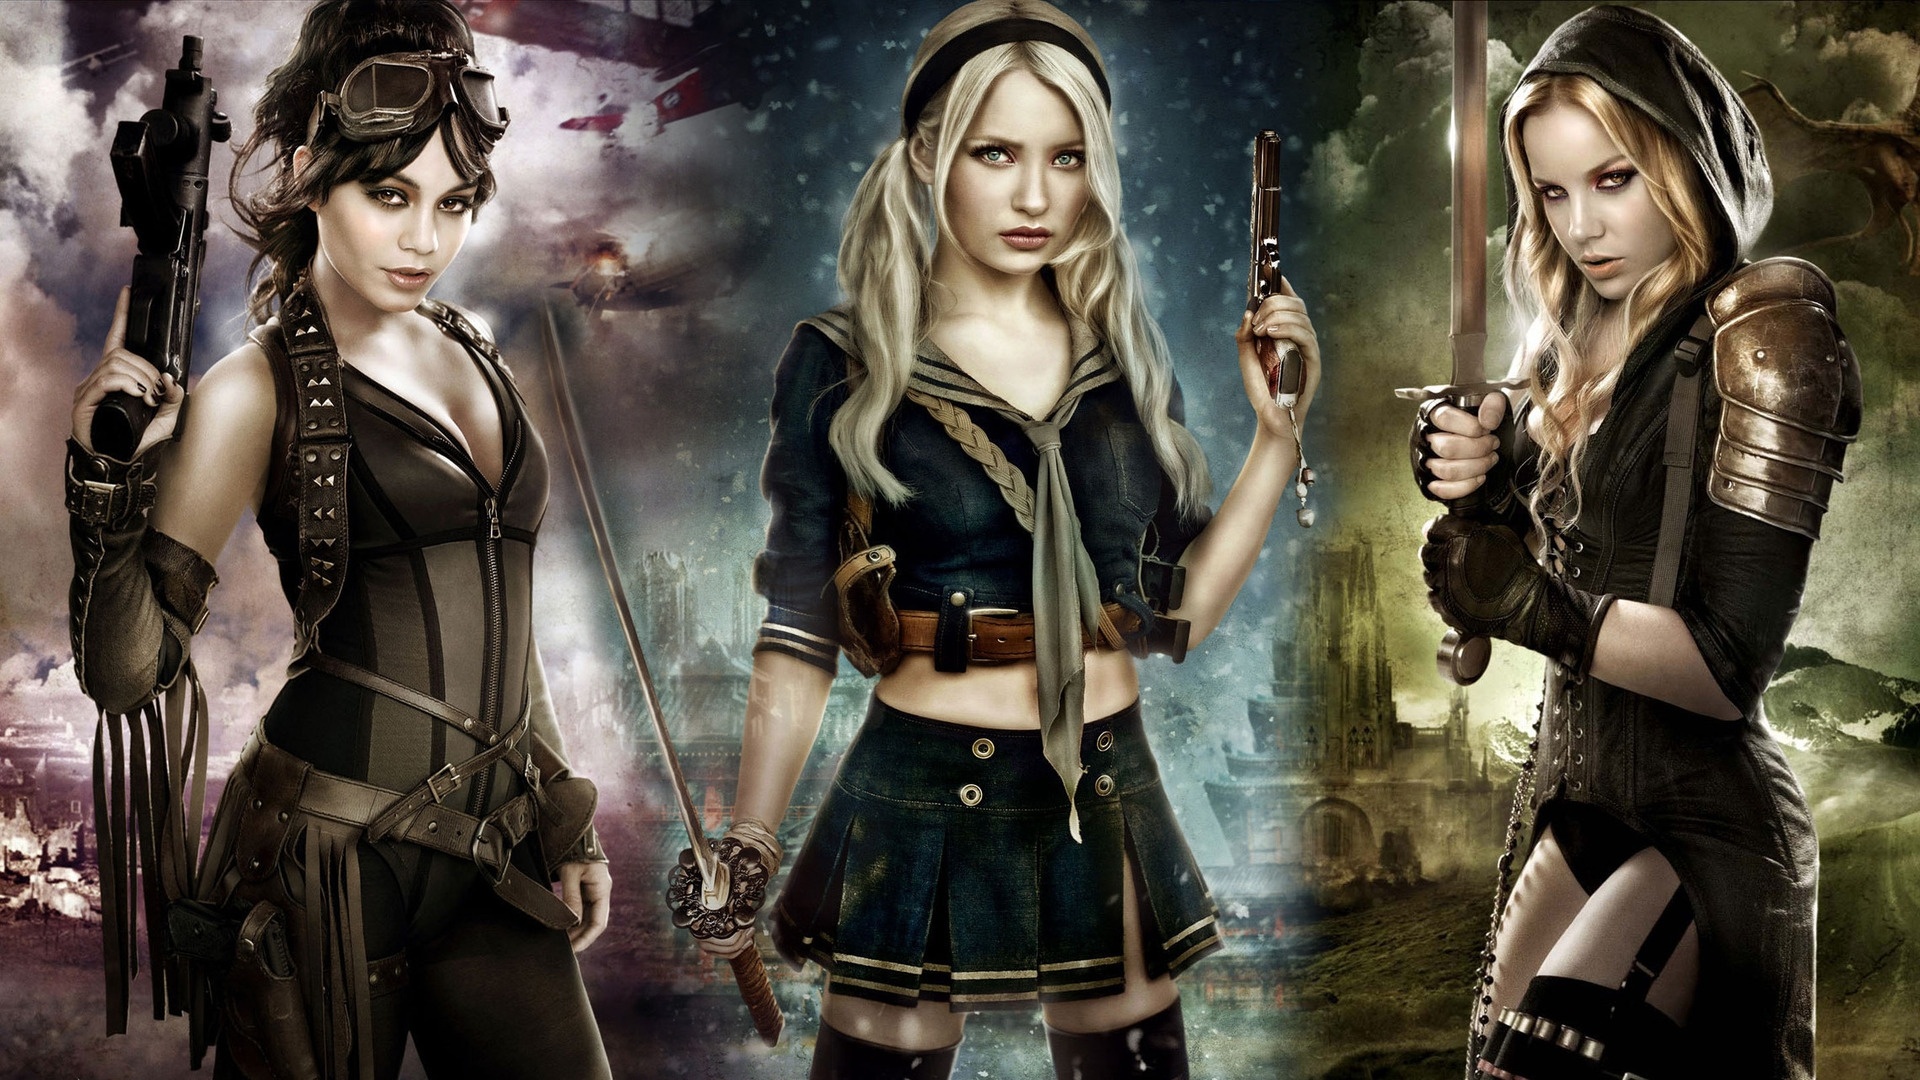 Three women in stylish costumes pose together against a dark, gritty backdrop.